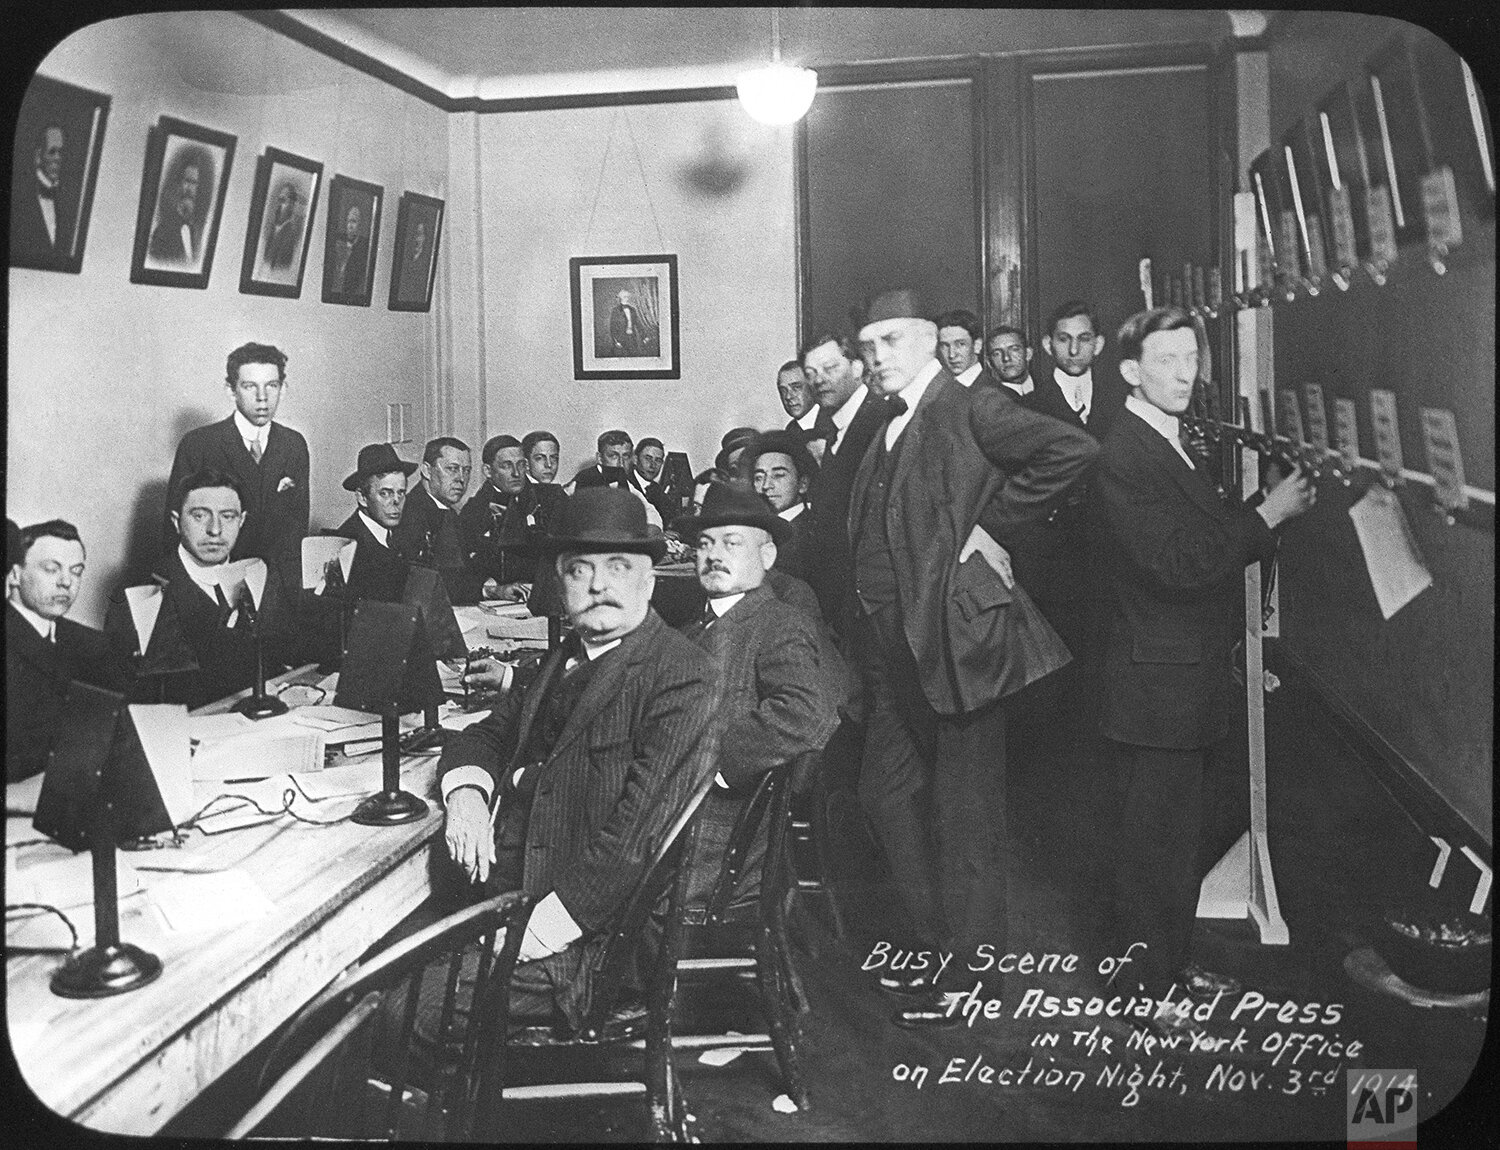  Workers crowd a room in the offices of The Associated Press in New York on election night, Nov. 3, 1914. (AP Photo) 